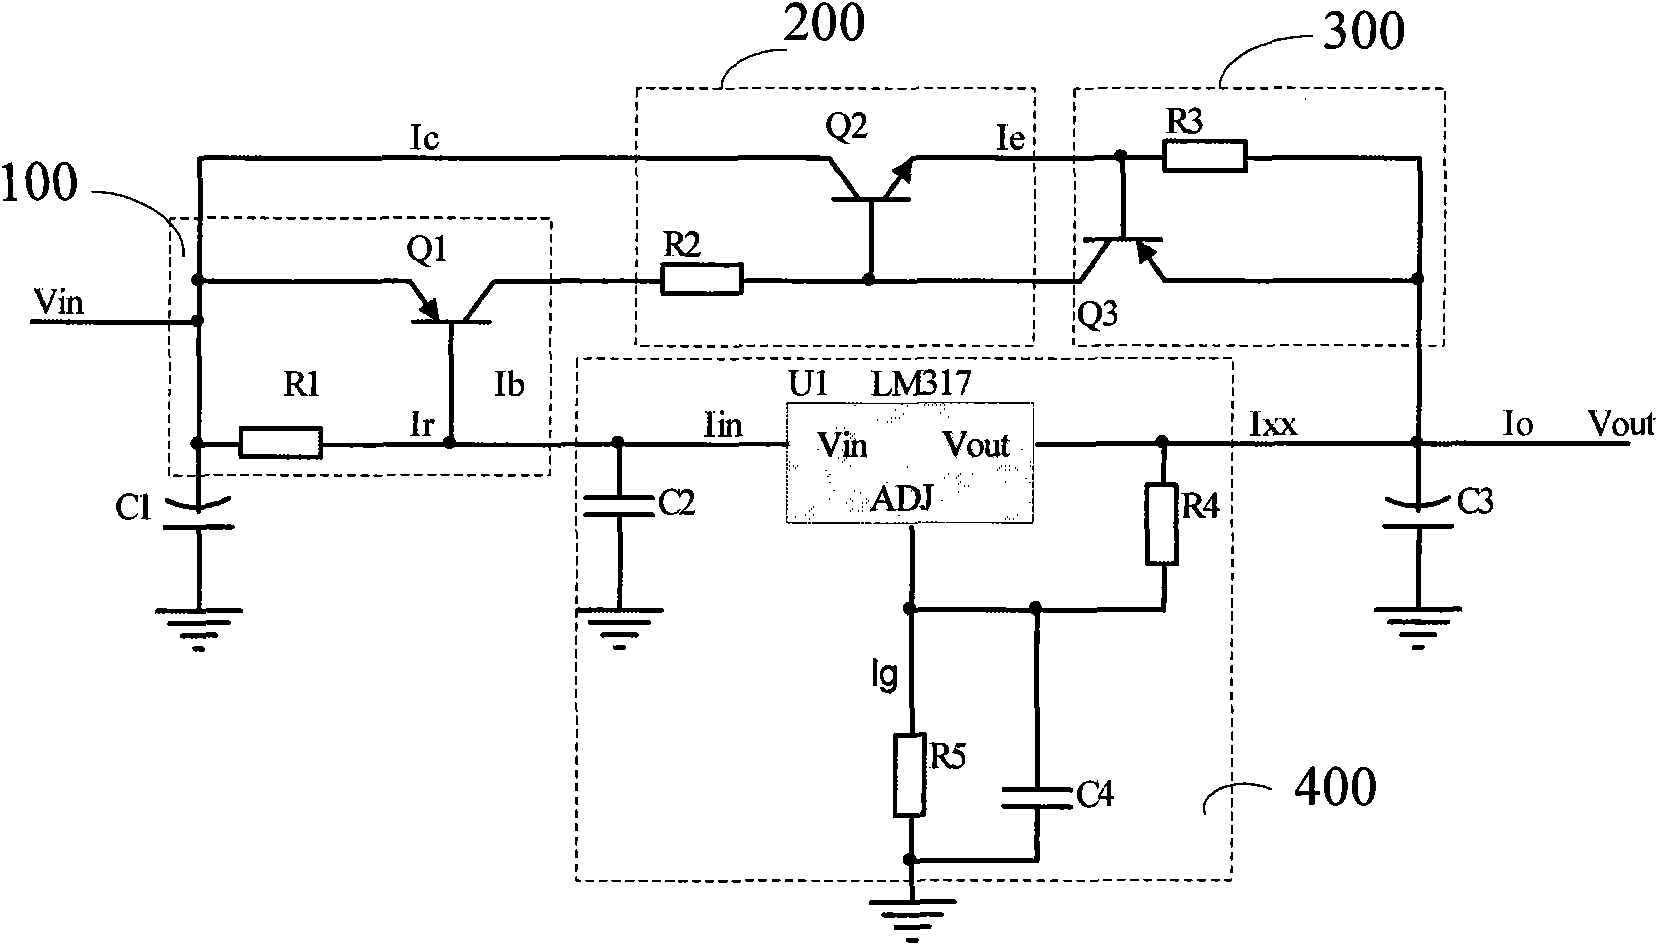 Current increasing and voltage stabilizing circuit with current limiting function